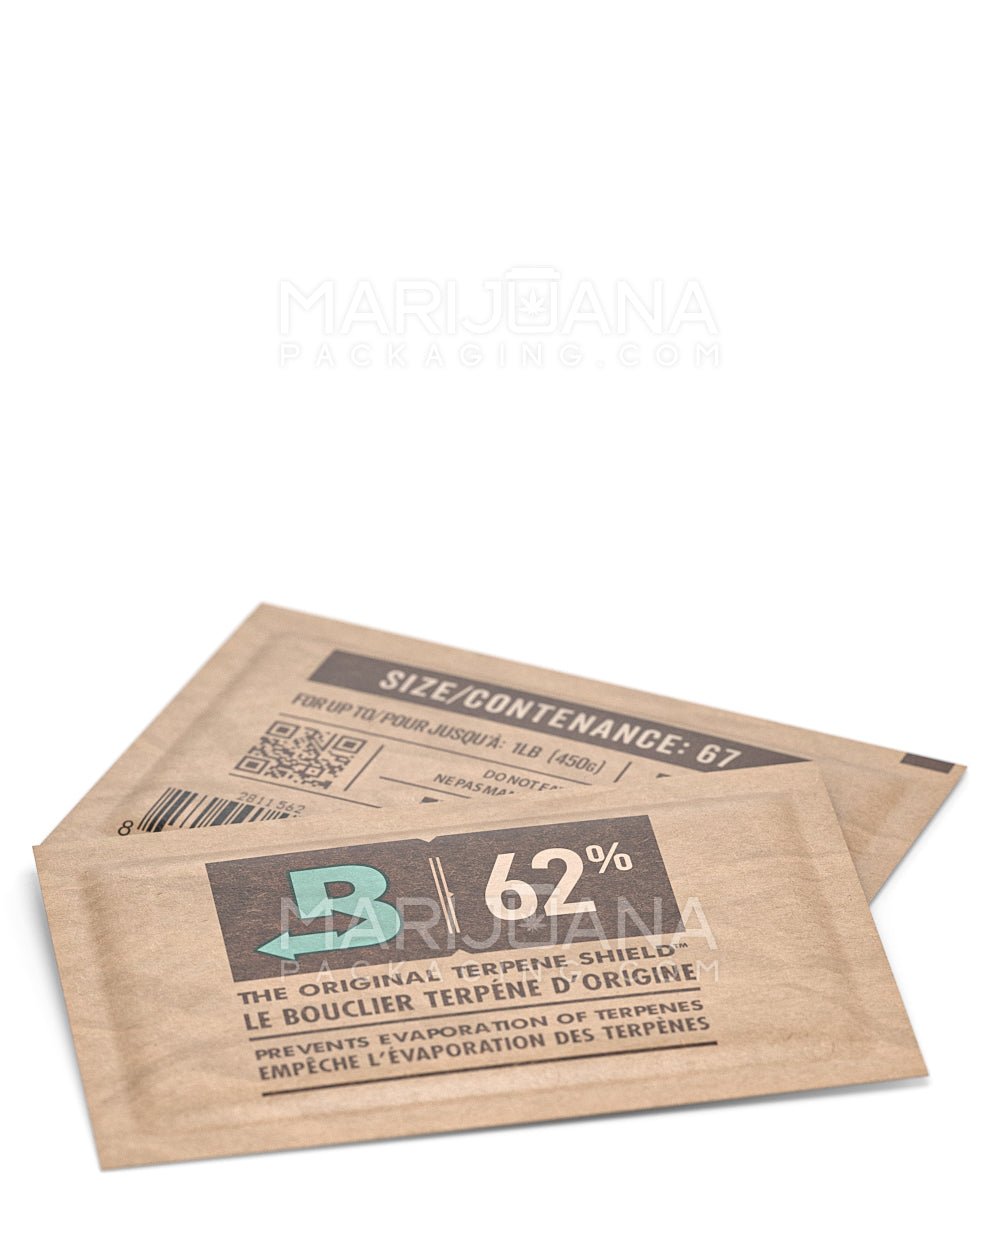 Boveda 62% Large Humidity Pack 4 Gram - 600 Count — MJ Wholesale